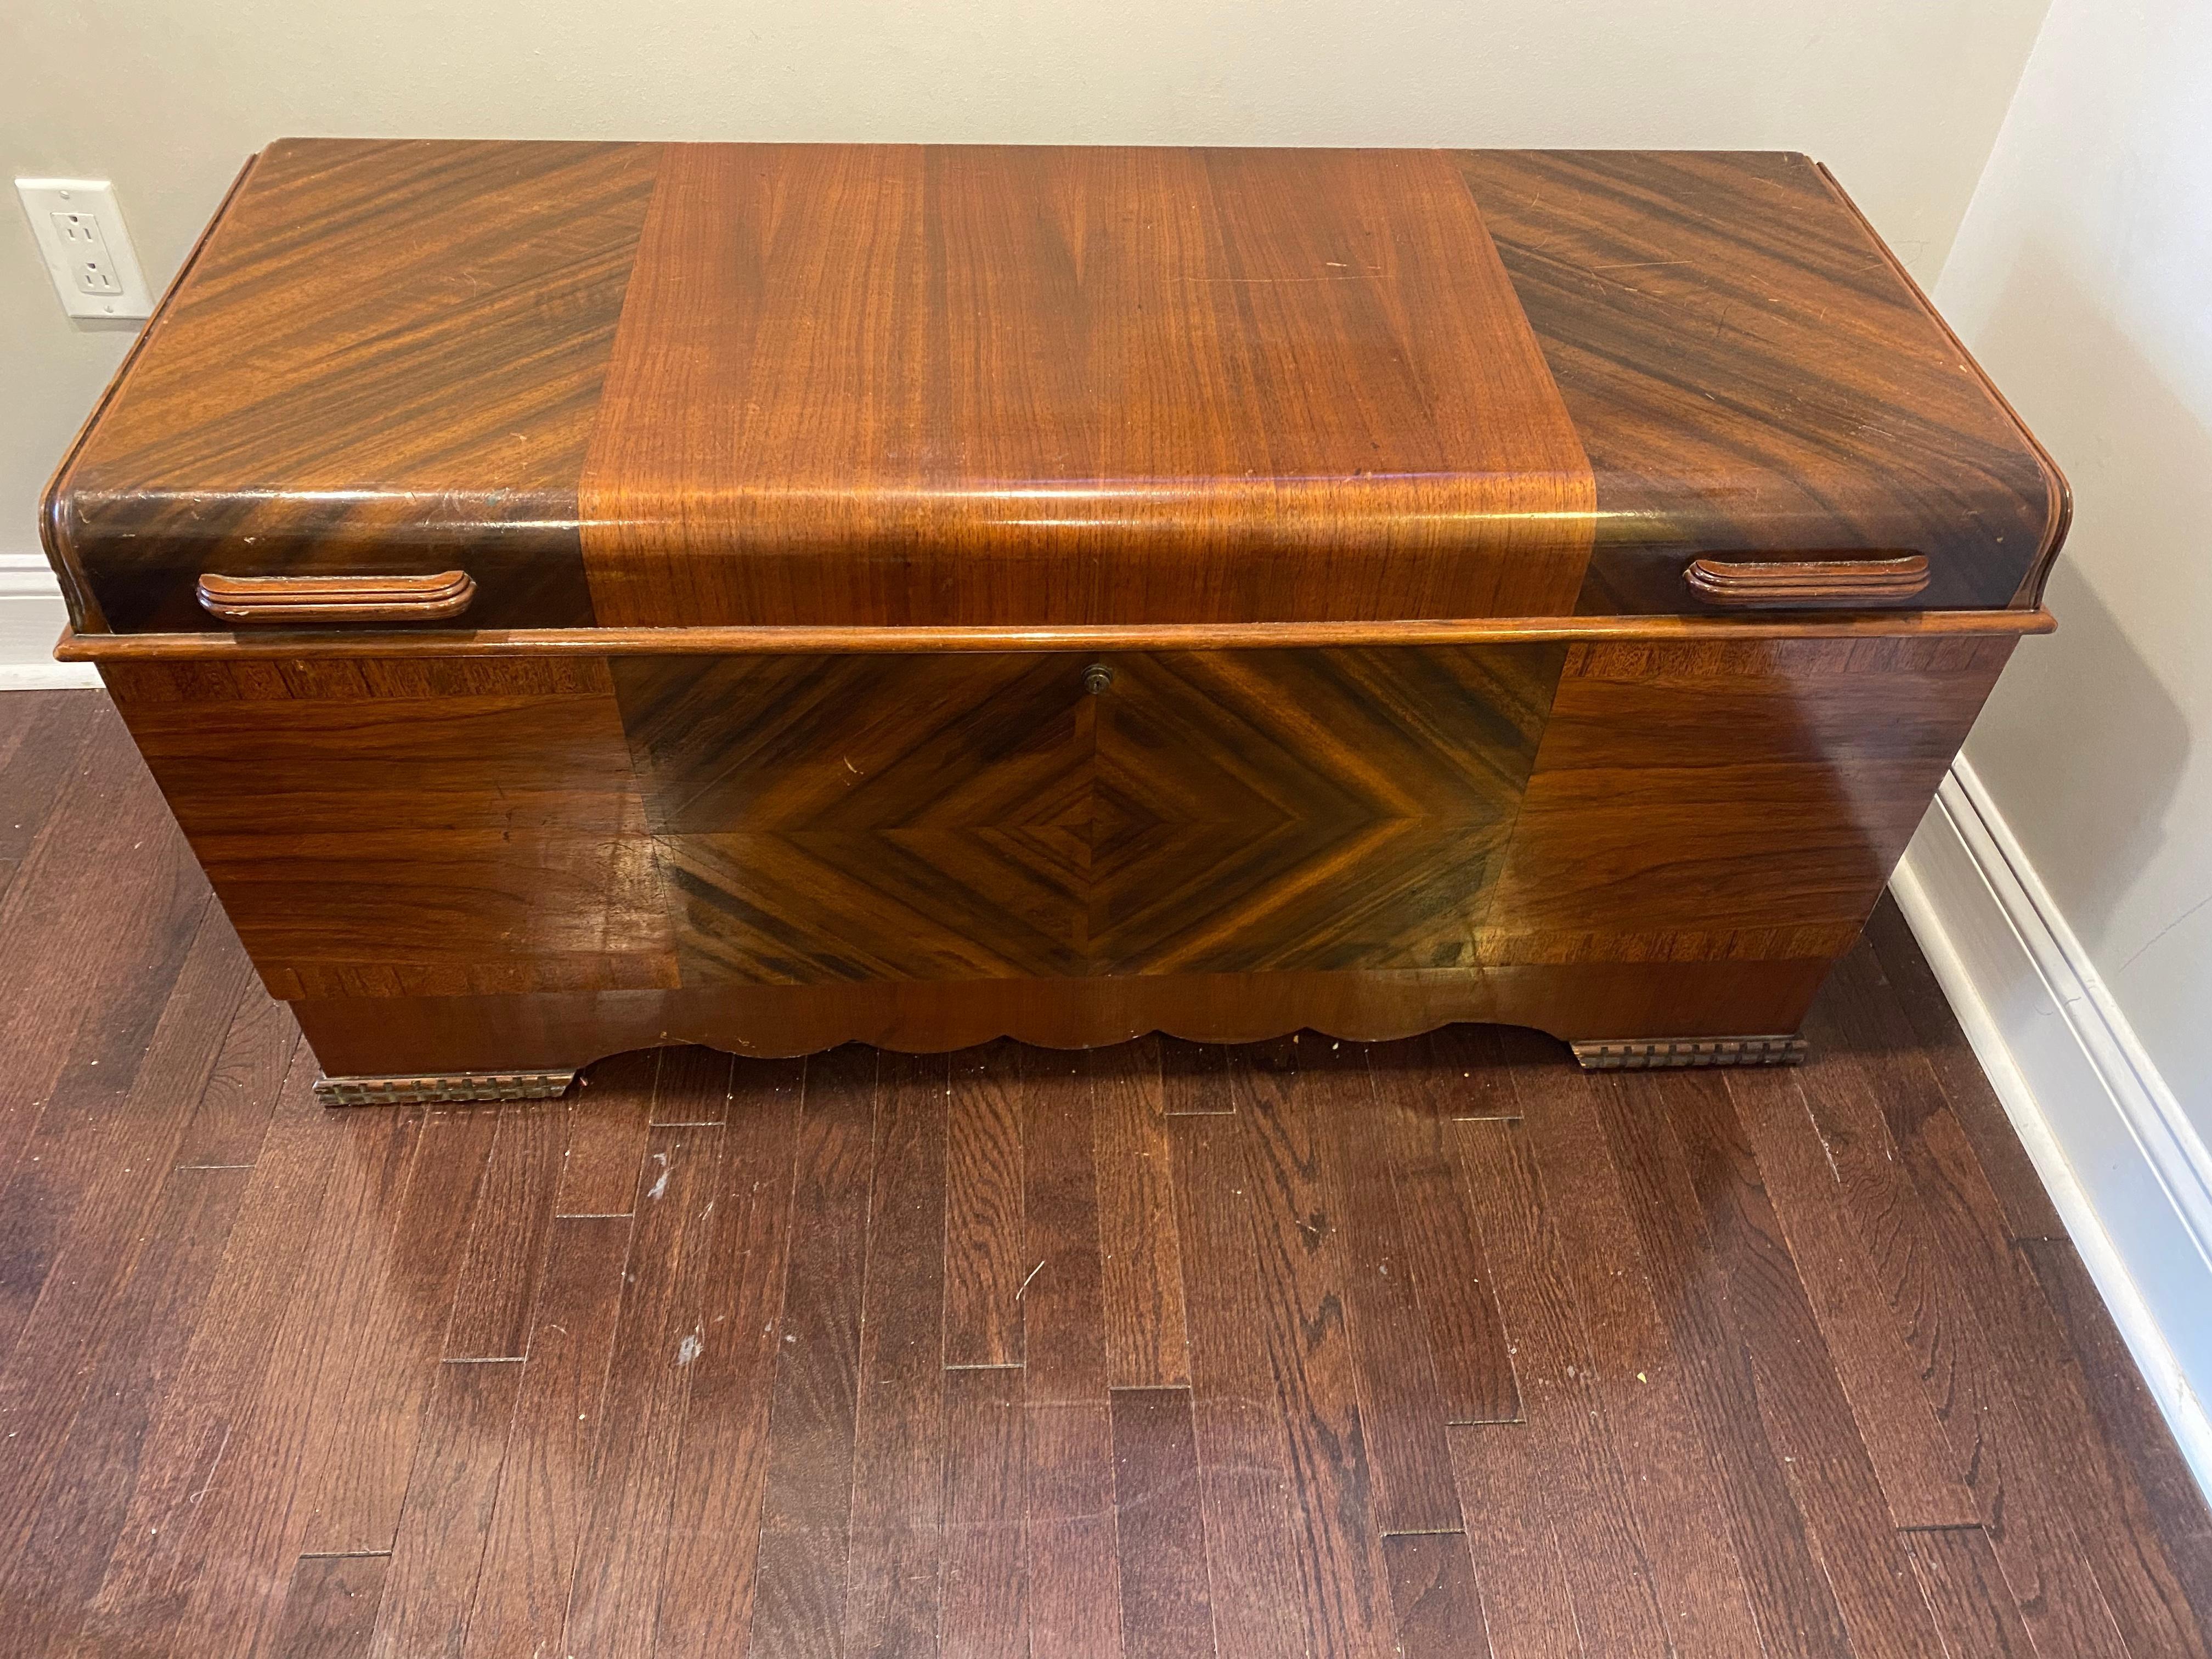 1940s vintage cedar chest, made by Lane, Altavista, VA. Beautiful “waterfall” Art Deco design with two-tone wood marquetry. Interior is lined with cedar and contains automatic tray lined with green felt. Style No. 481753, Serial No. 048110.